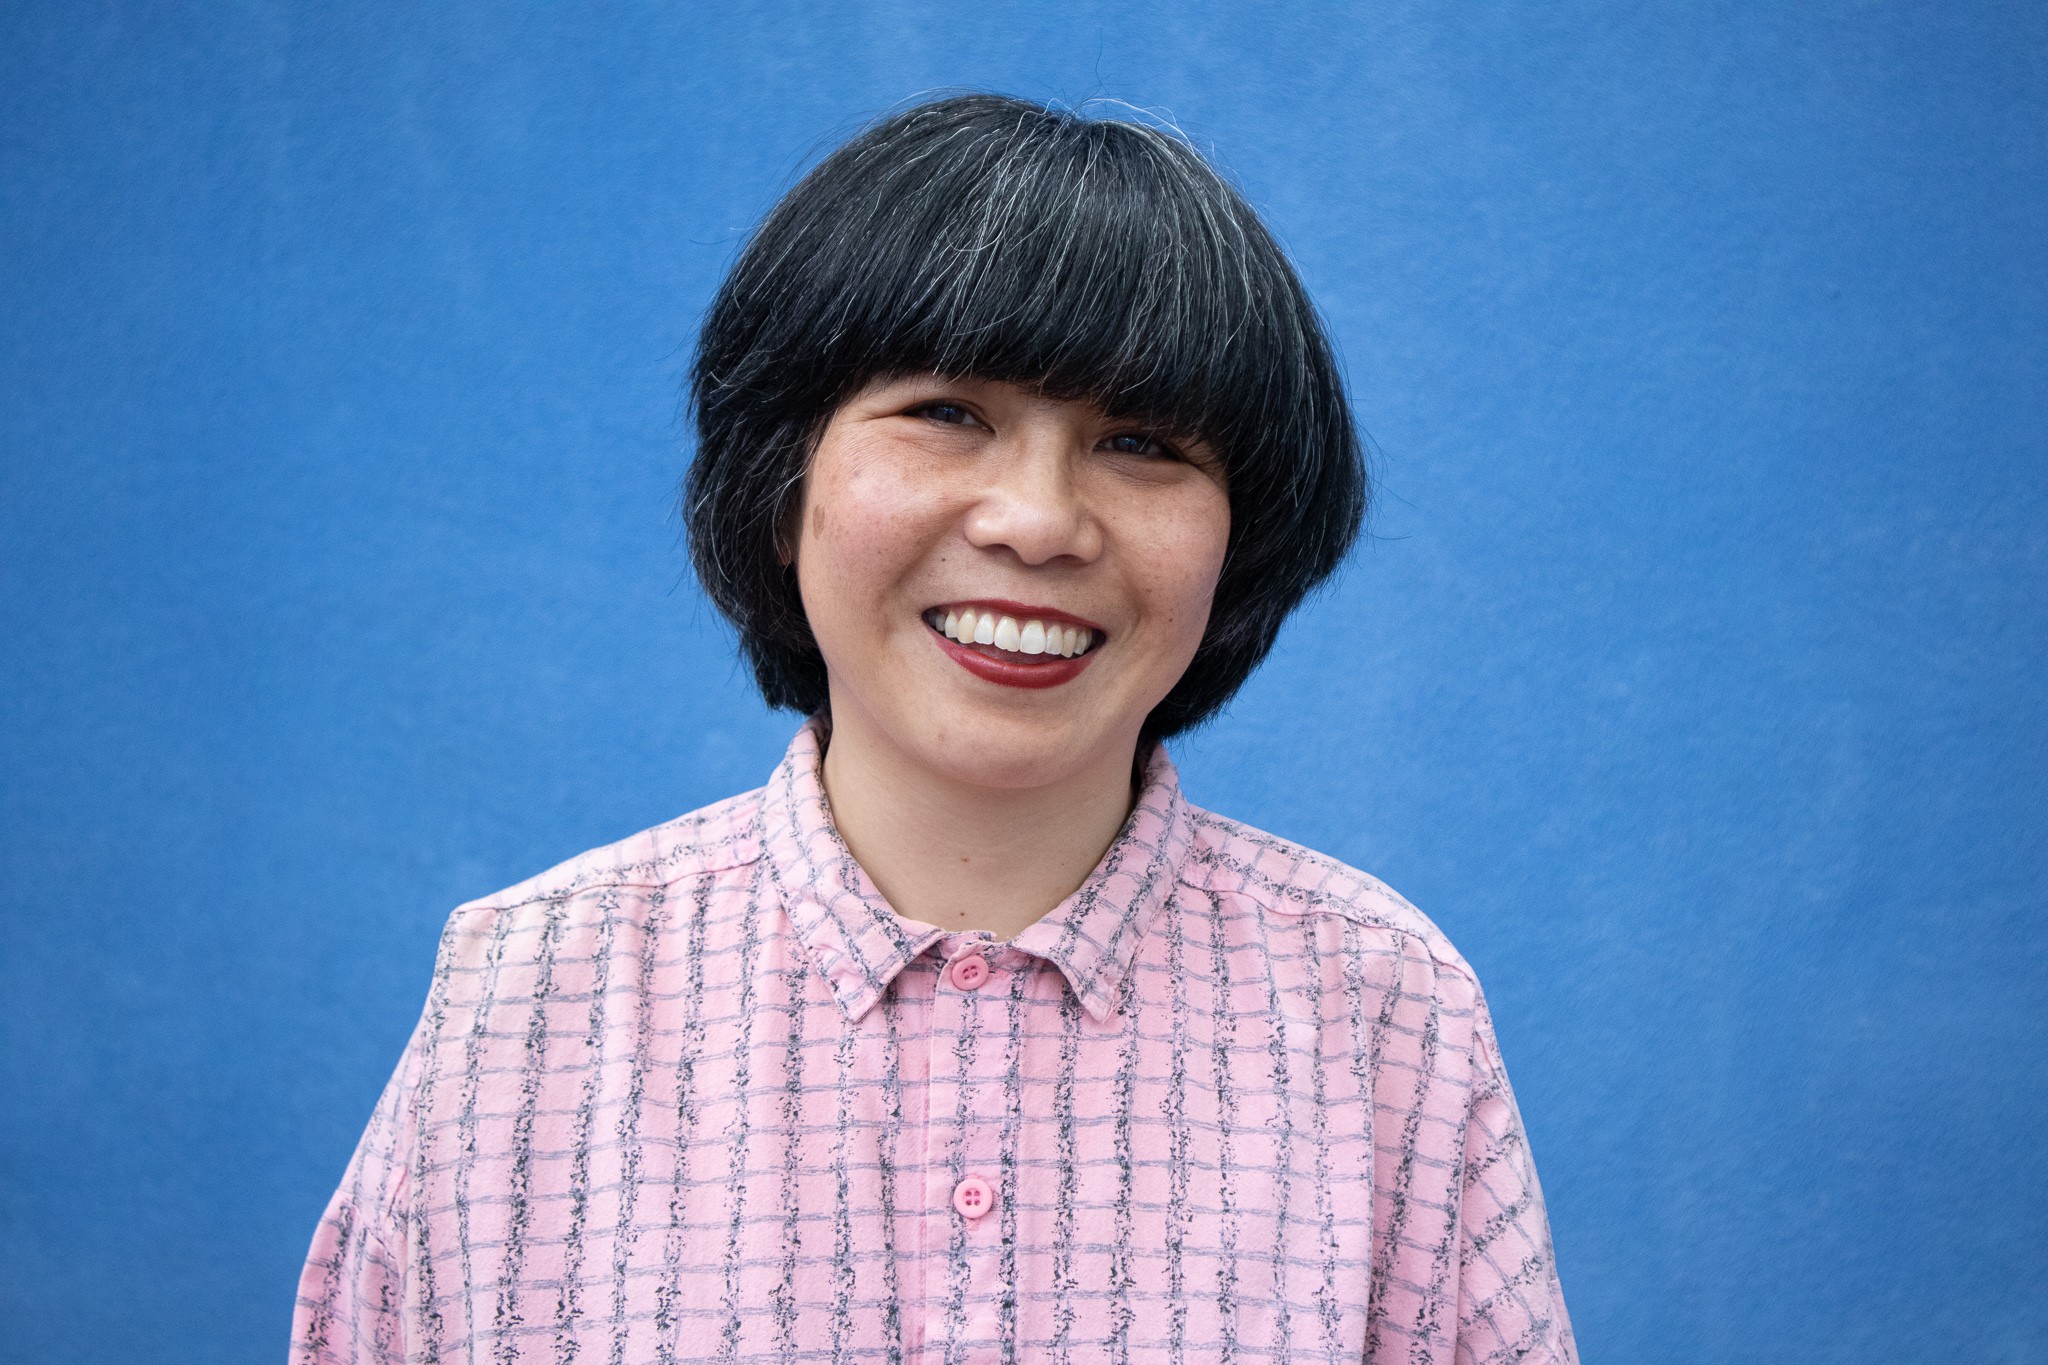 A smiling woman with a black bob and pink shirt against a blue background